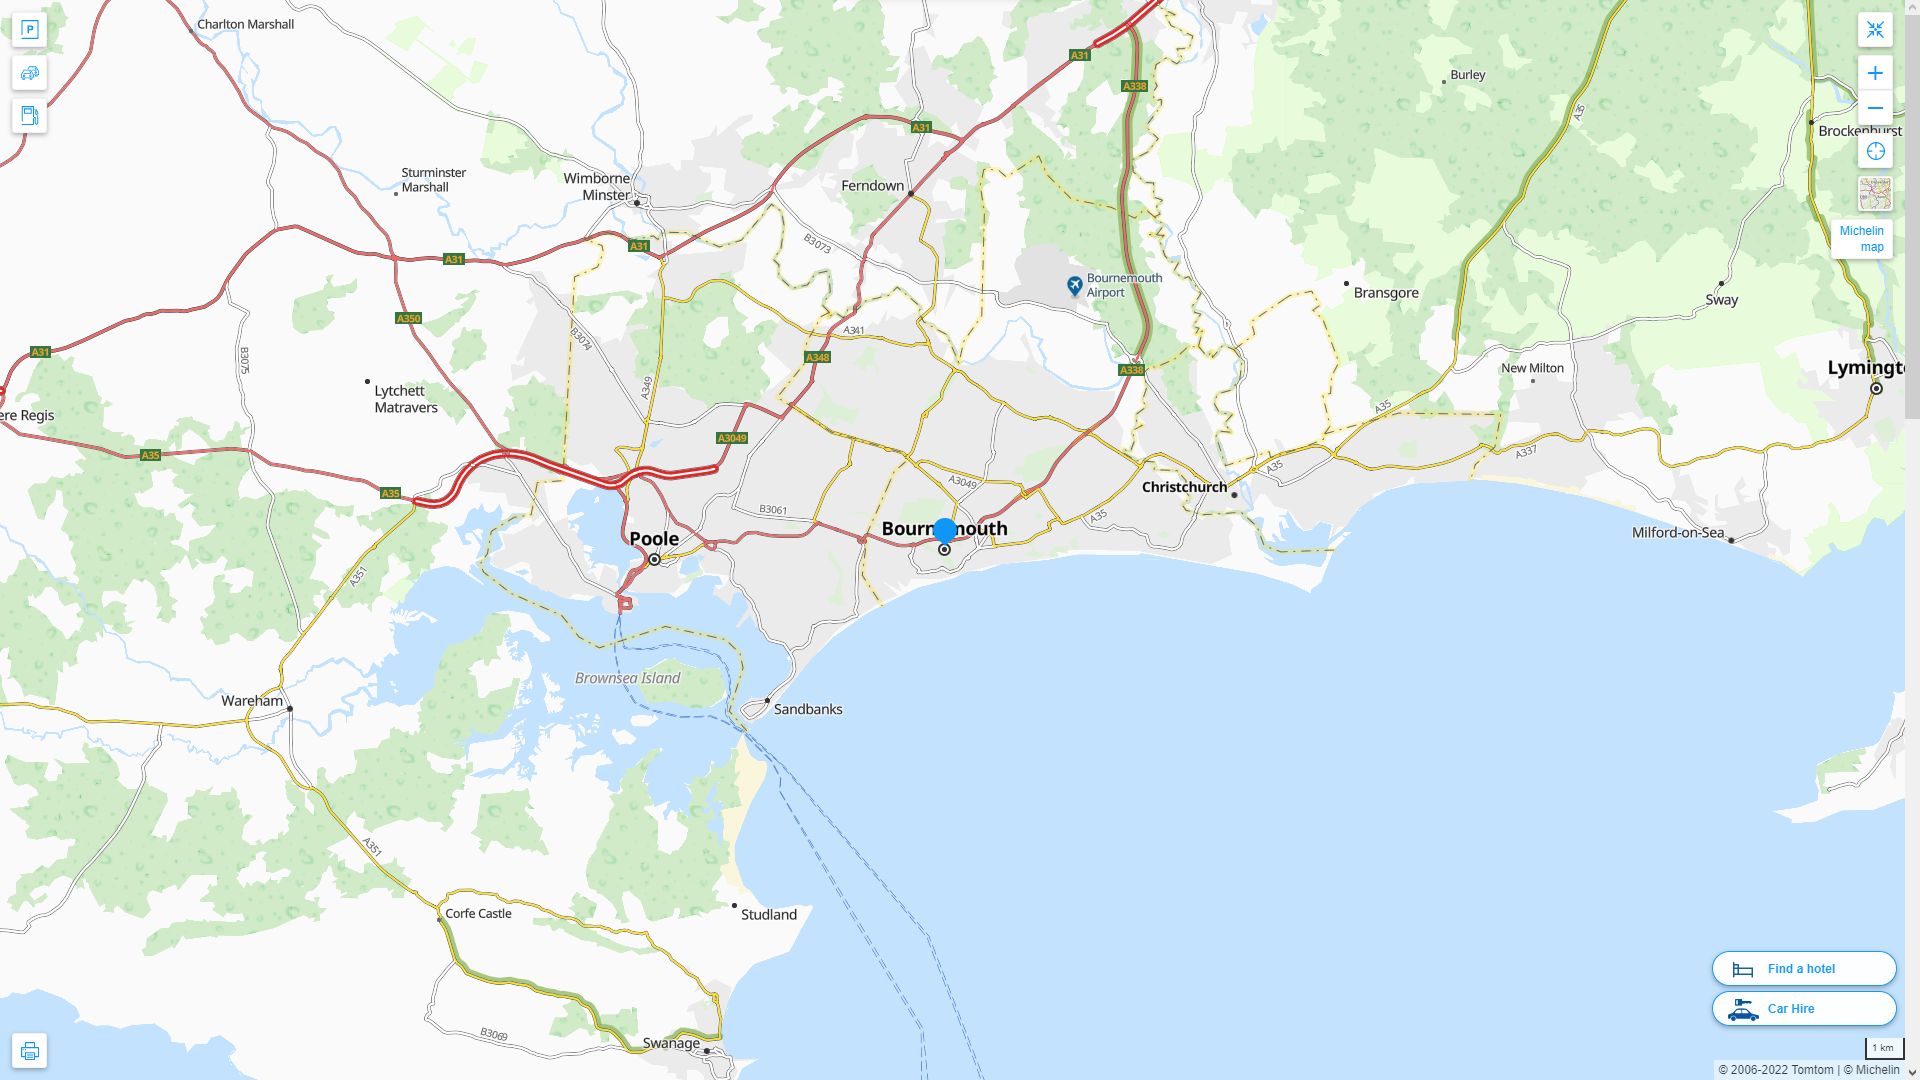 Bournemouth Highway and Road Map